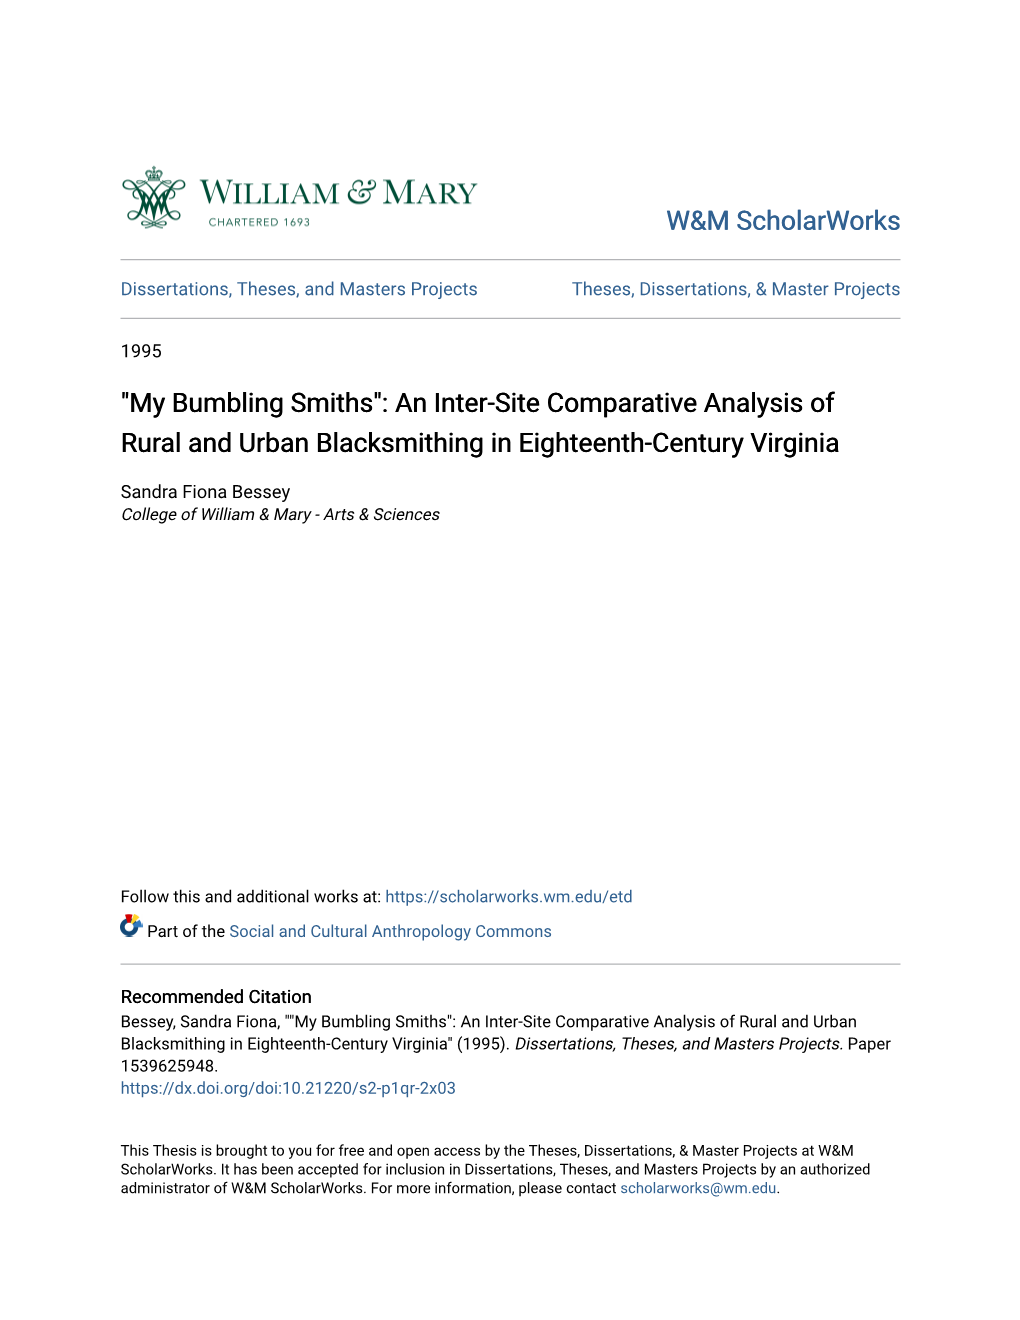 "My Bumbling Smiths": an Inter-Site Comparative Analysis of Rural and Urban Blacksmithing in Eighteenth-Century Virginia